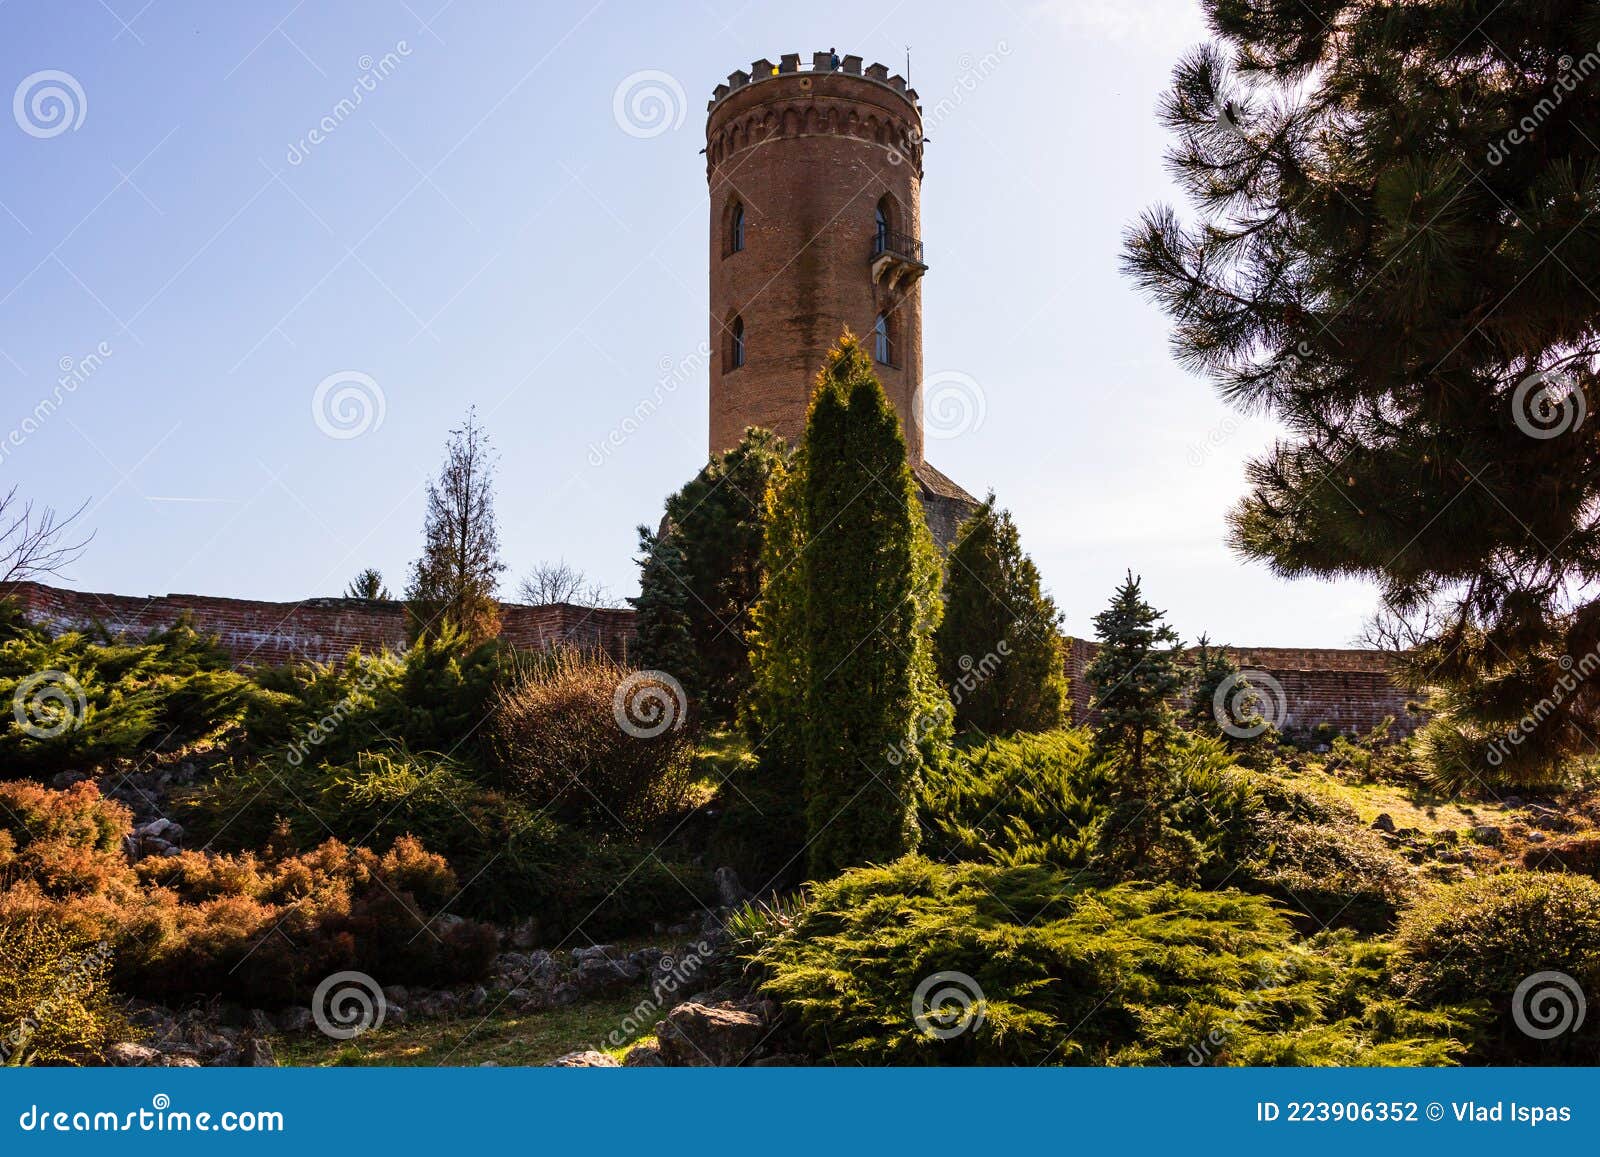 the chindia tower or turnul chindiei is a tower in the targoviste royal court or curtea domneasca monuments ensemble in downtown